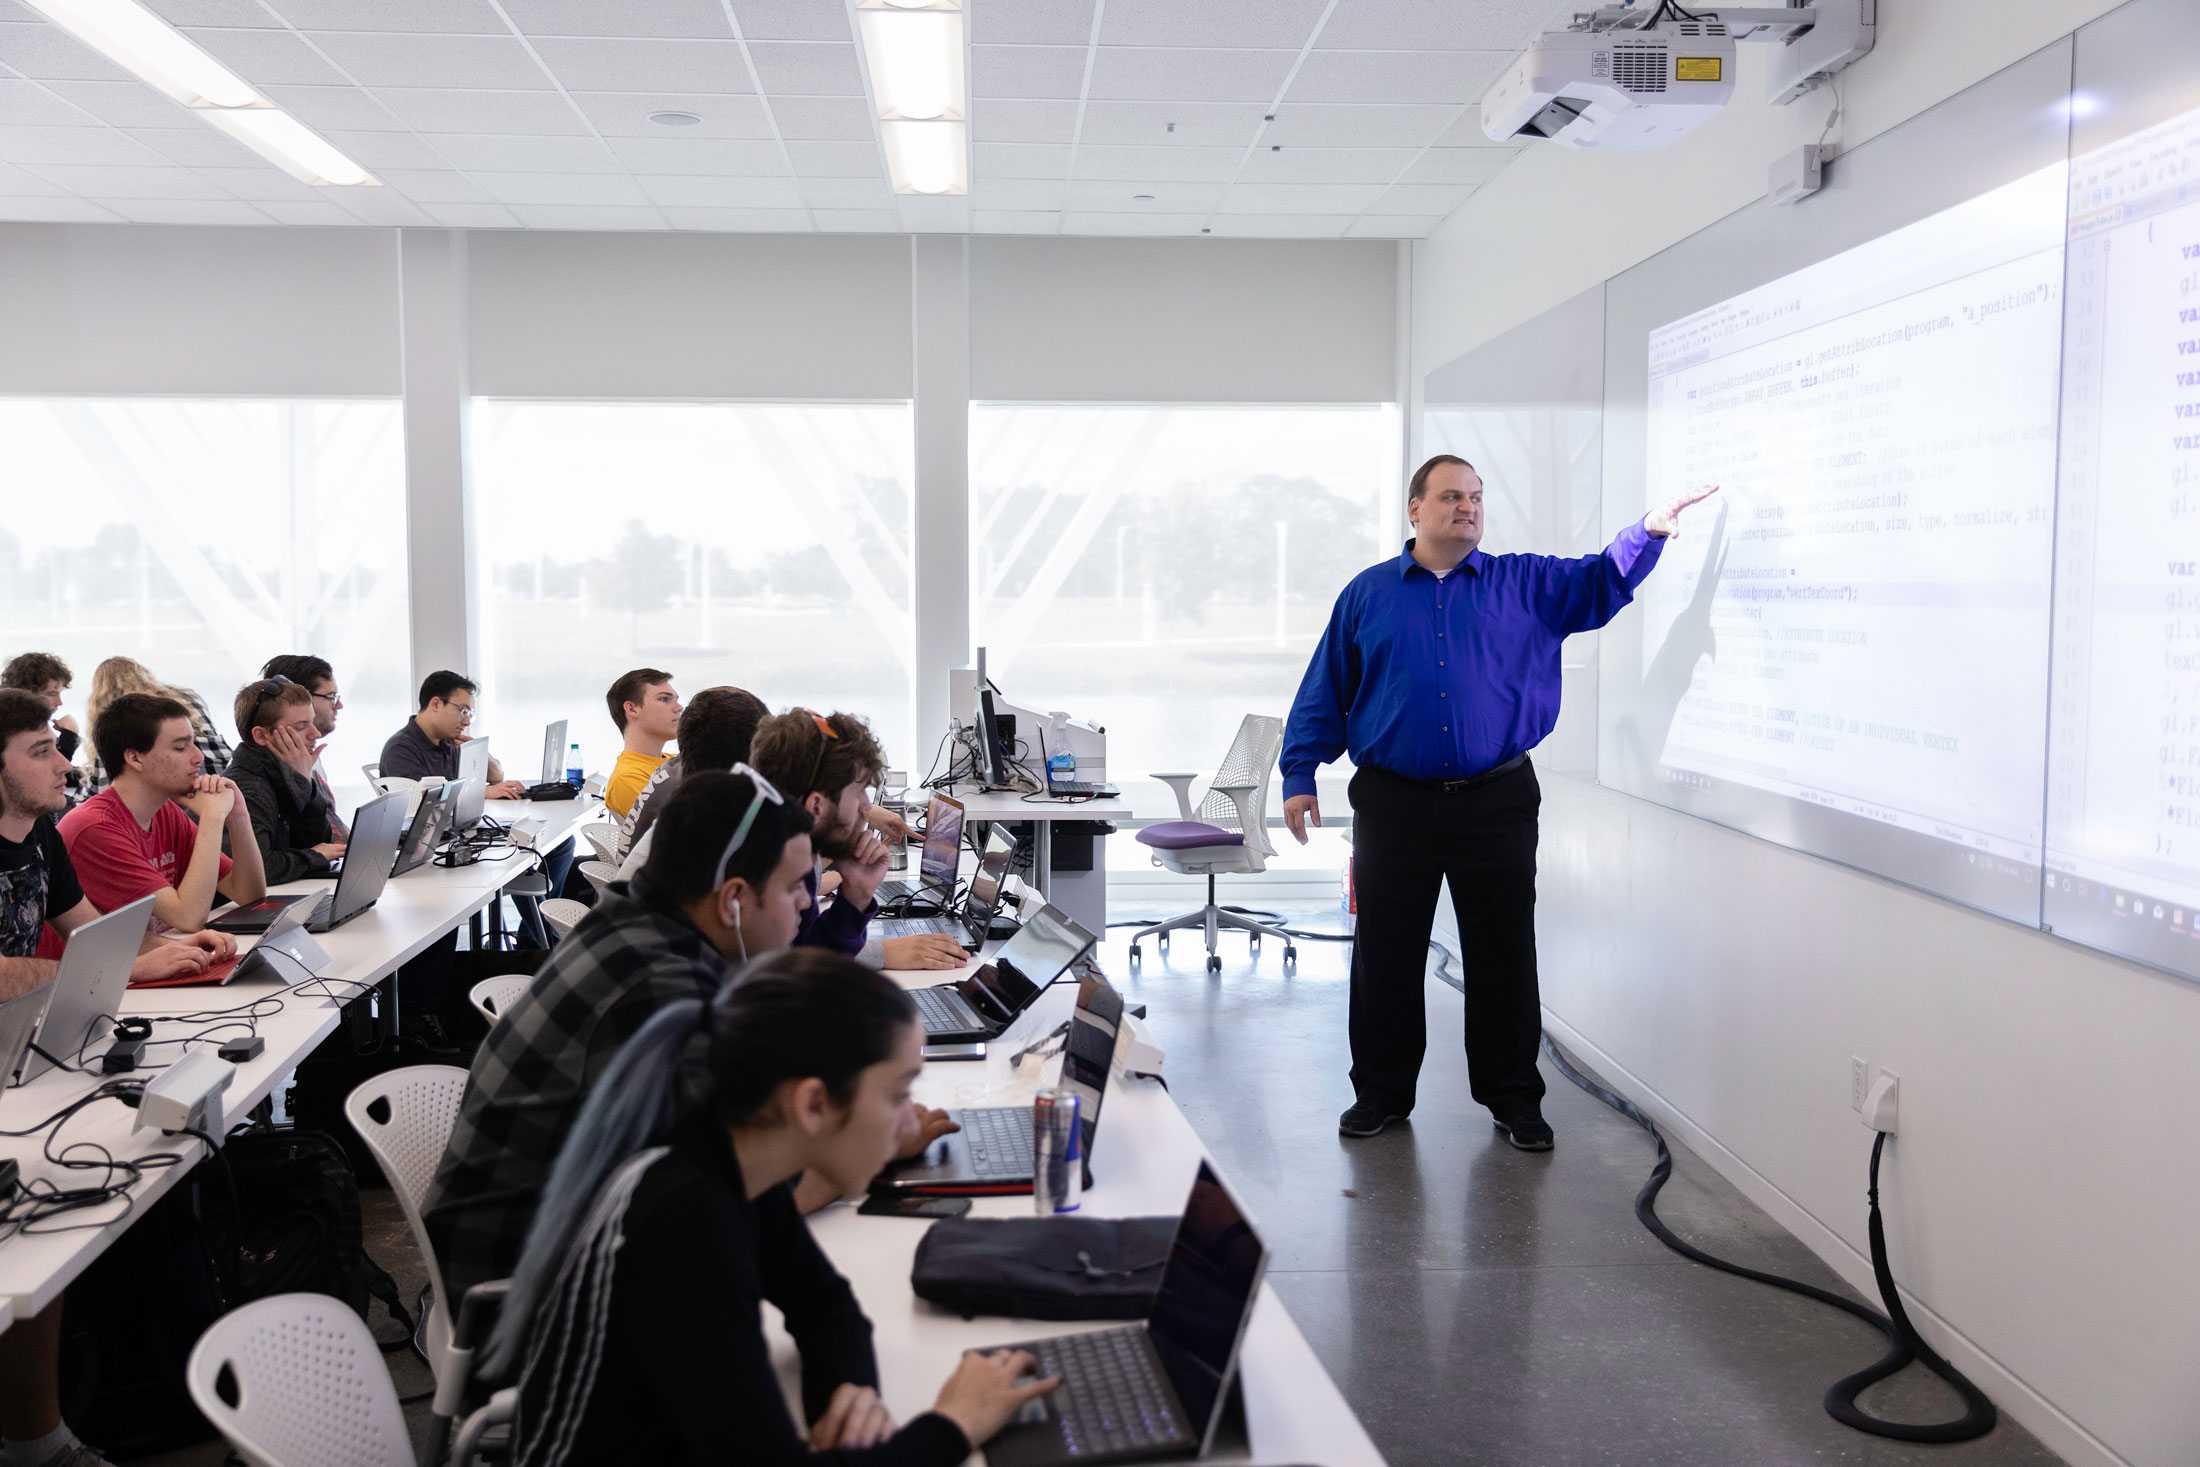 Dr. Bradford Towle, chair of the department of computer science, instructs a class inside the Innovation, Science, and Technology Building at Florida Polytechnic University.